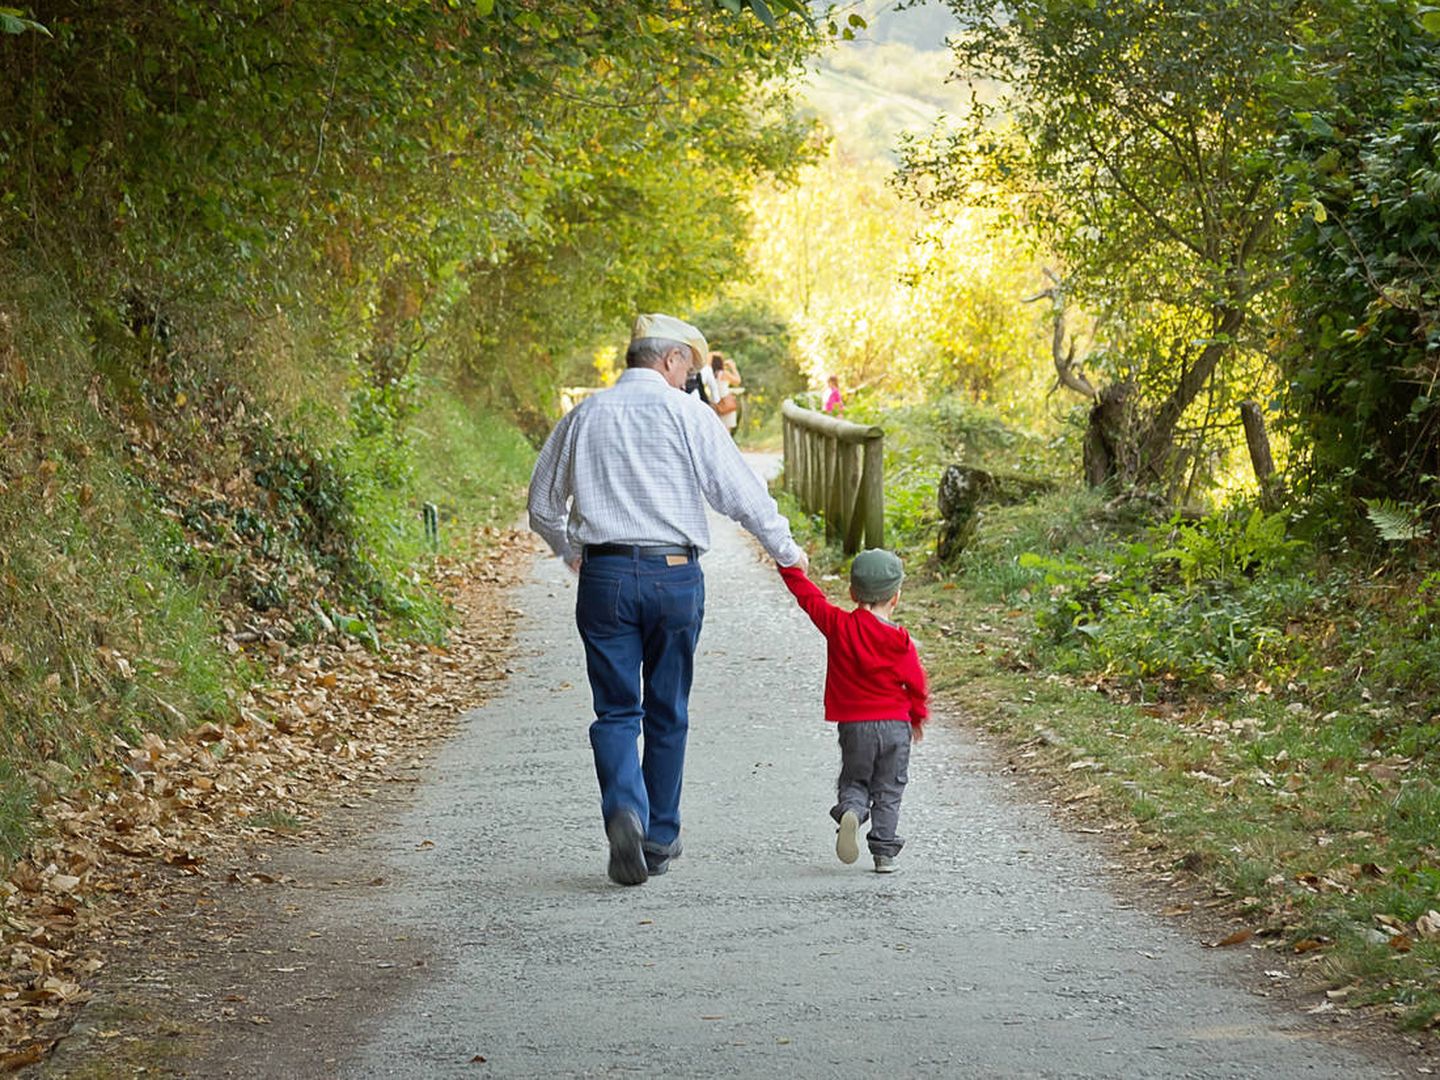 Back view of grandfather and grandchild walking in a nature path